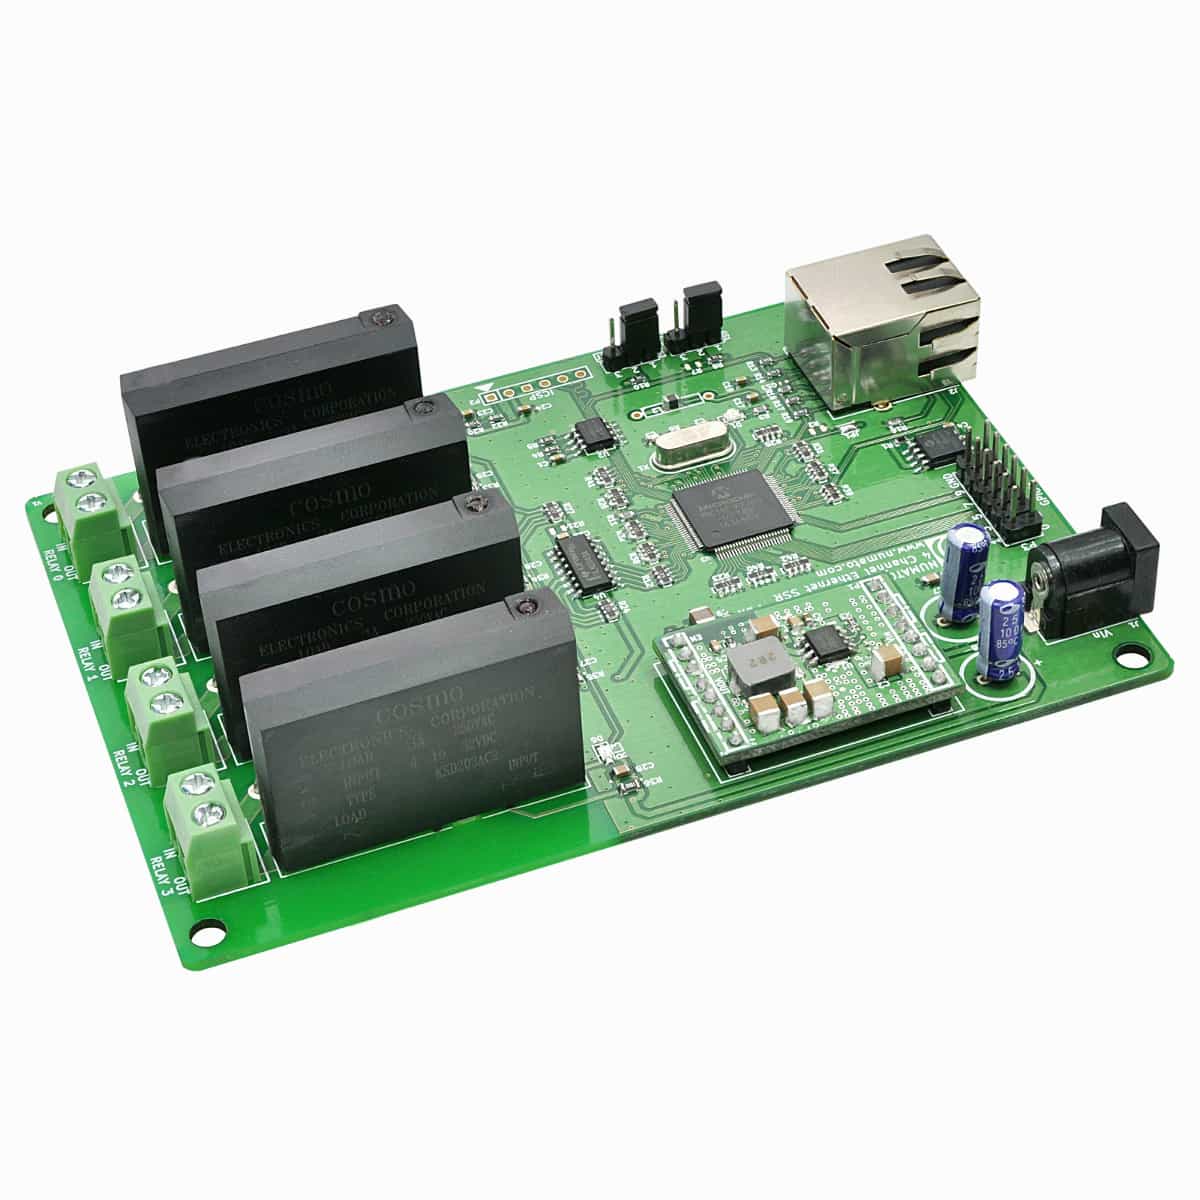 Global Solid-State Relay Sales Market 2017-2022: Industry Outlook